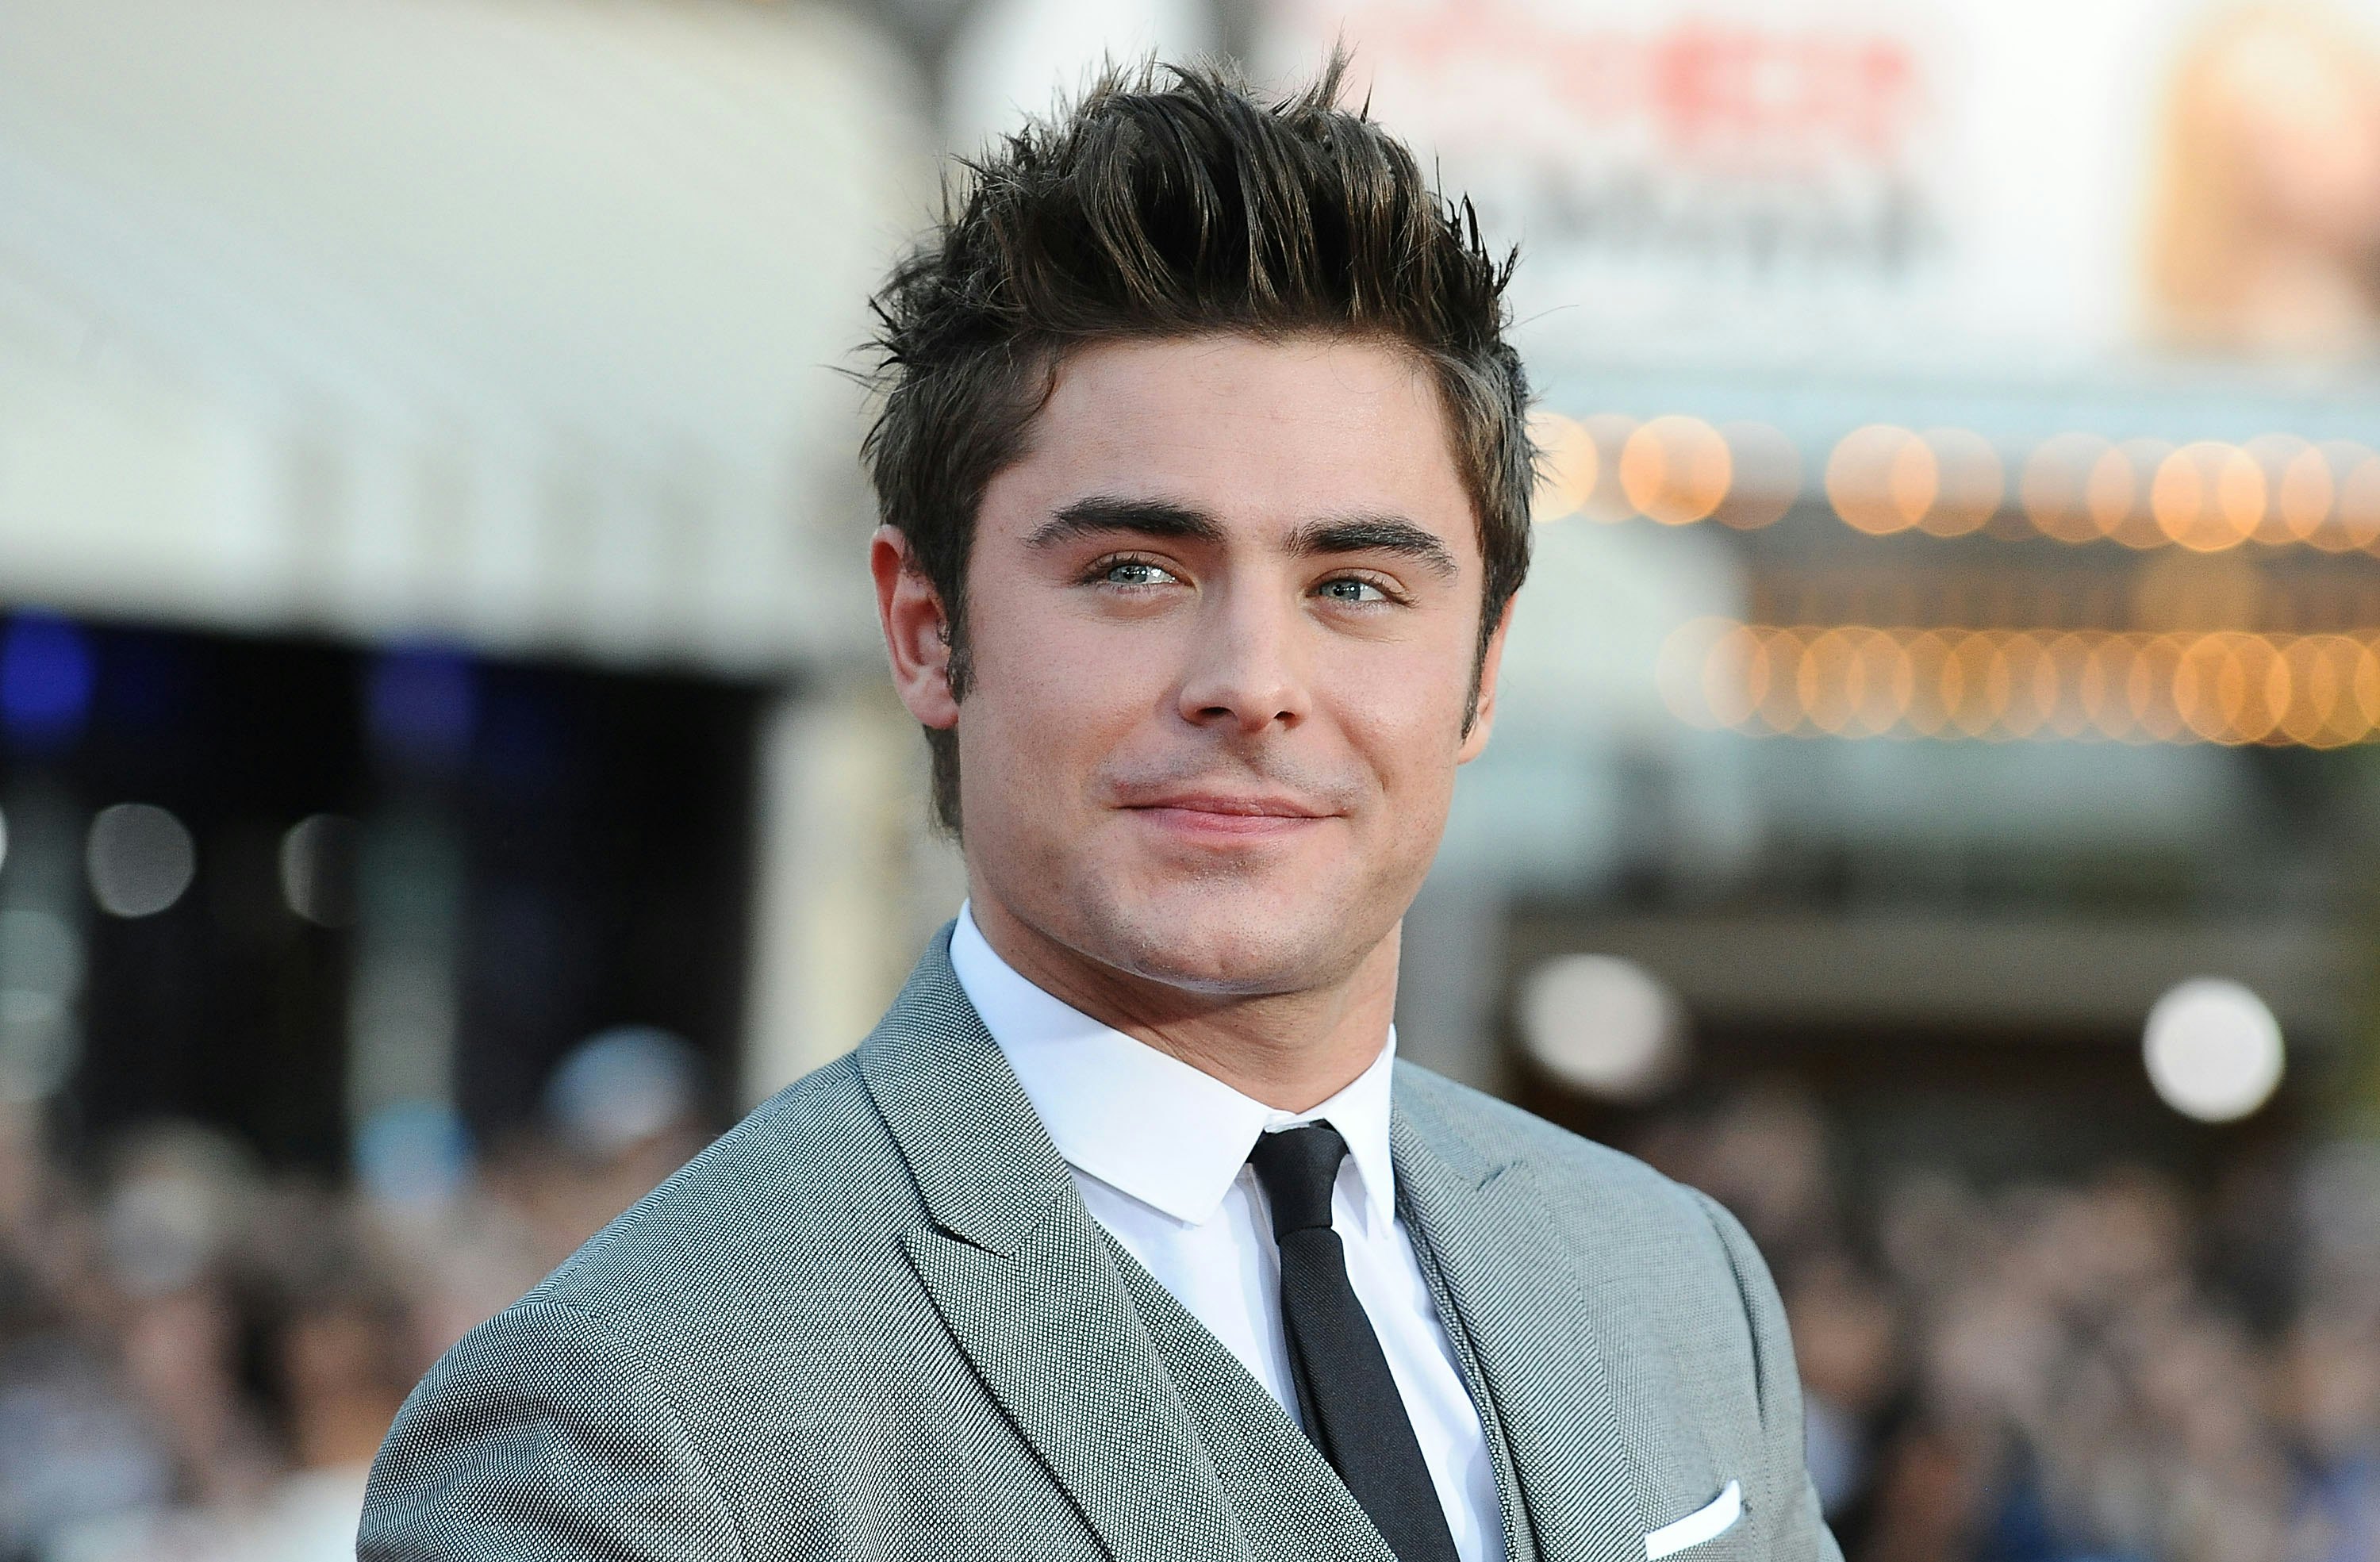 Zac Efron hair, hairstyles and haircuts - Guide with Pictures